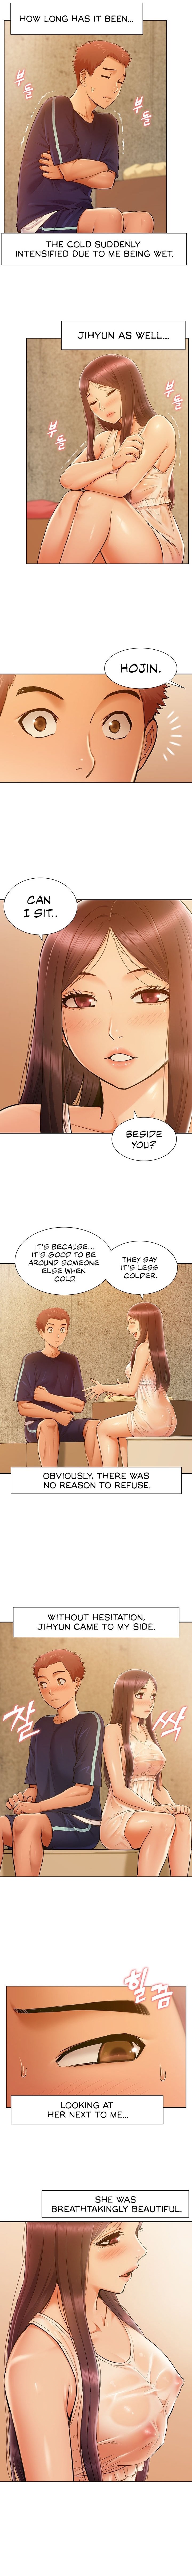 the-memories-of-that-summer-day-chap-23-9